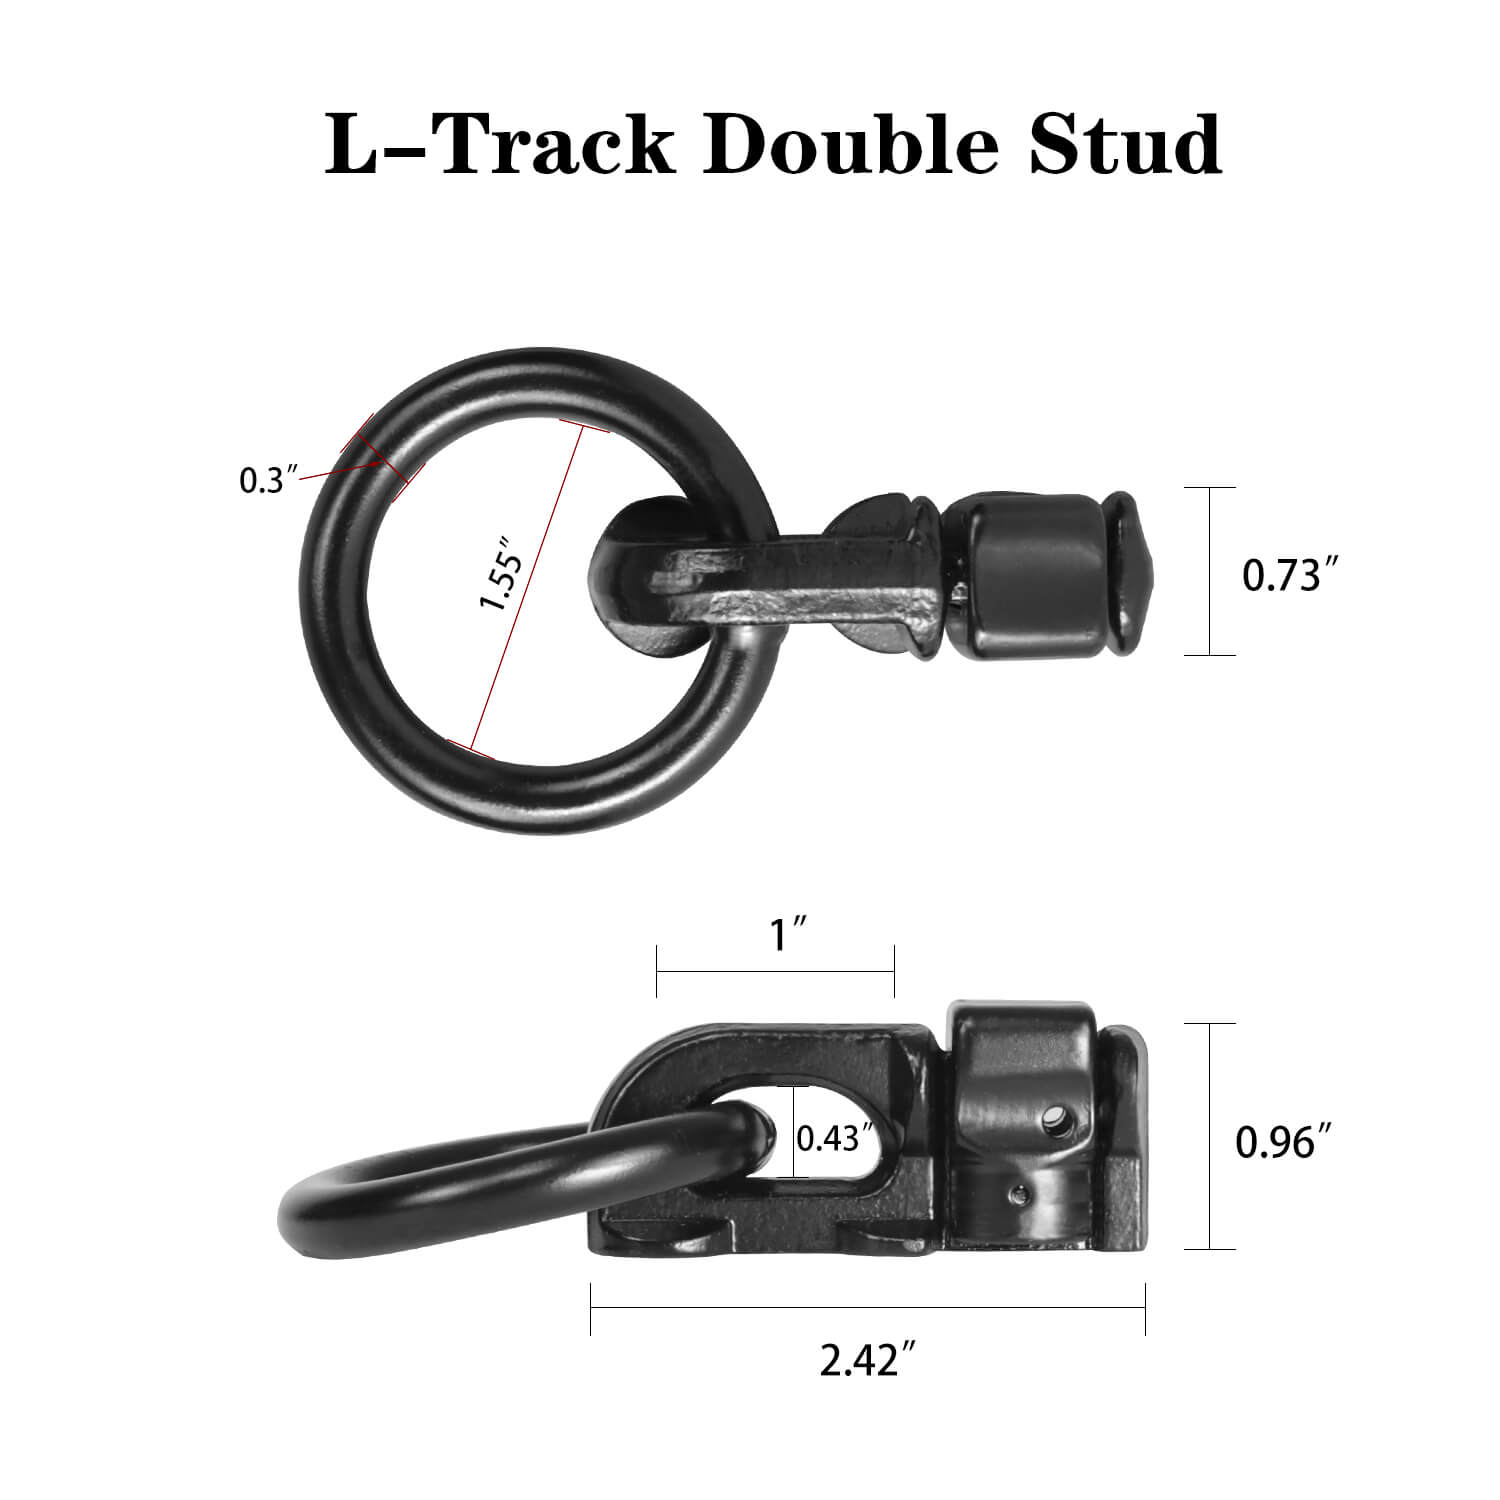 Black L-Track Tie Down System L-Track Rails and Single Stud Fittings Easy  Installation, Versatile Trailer Tie Down